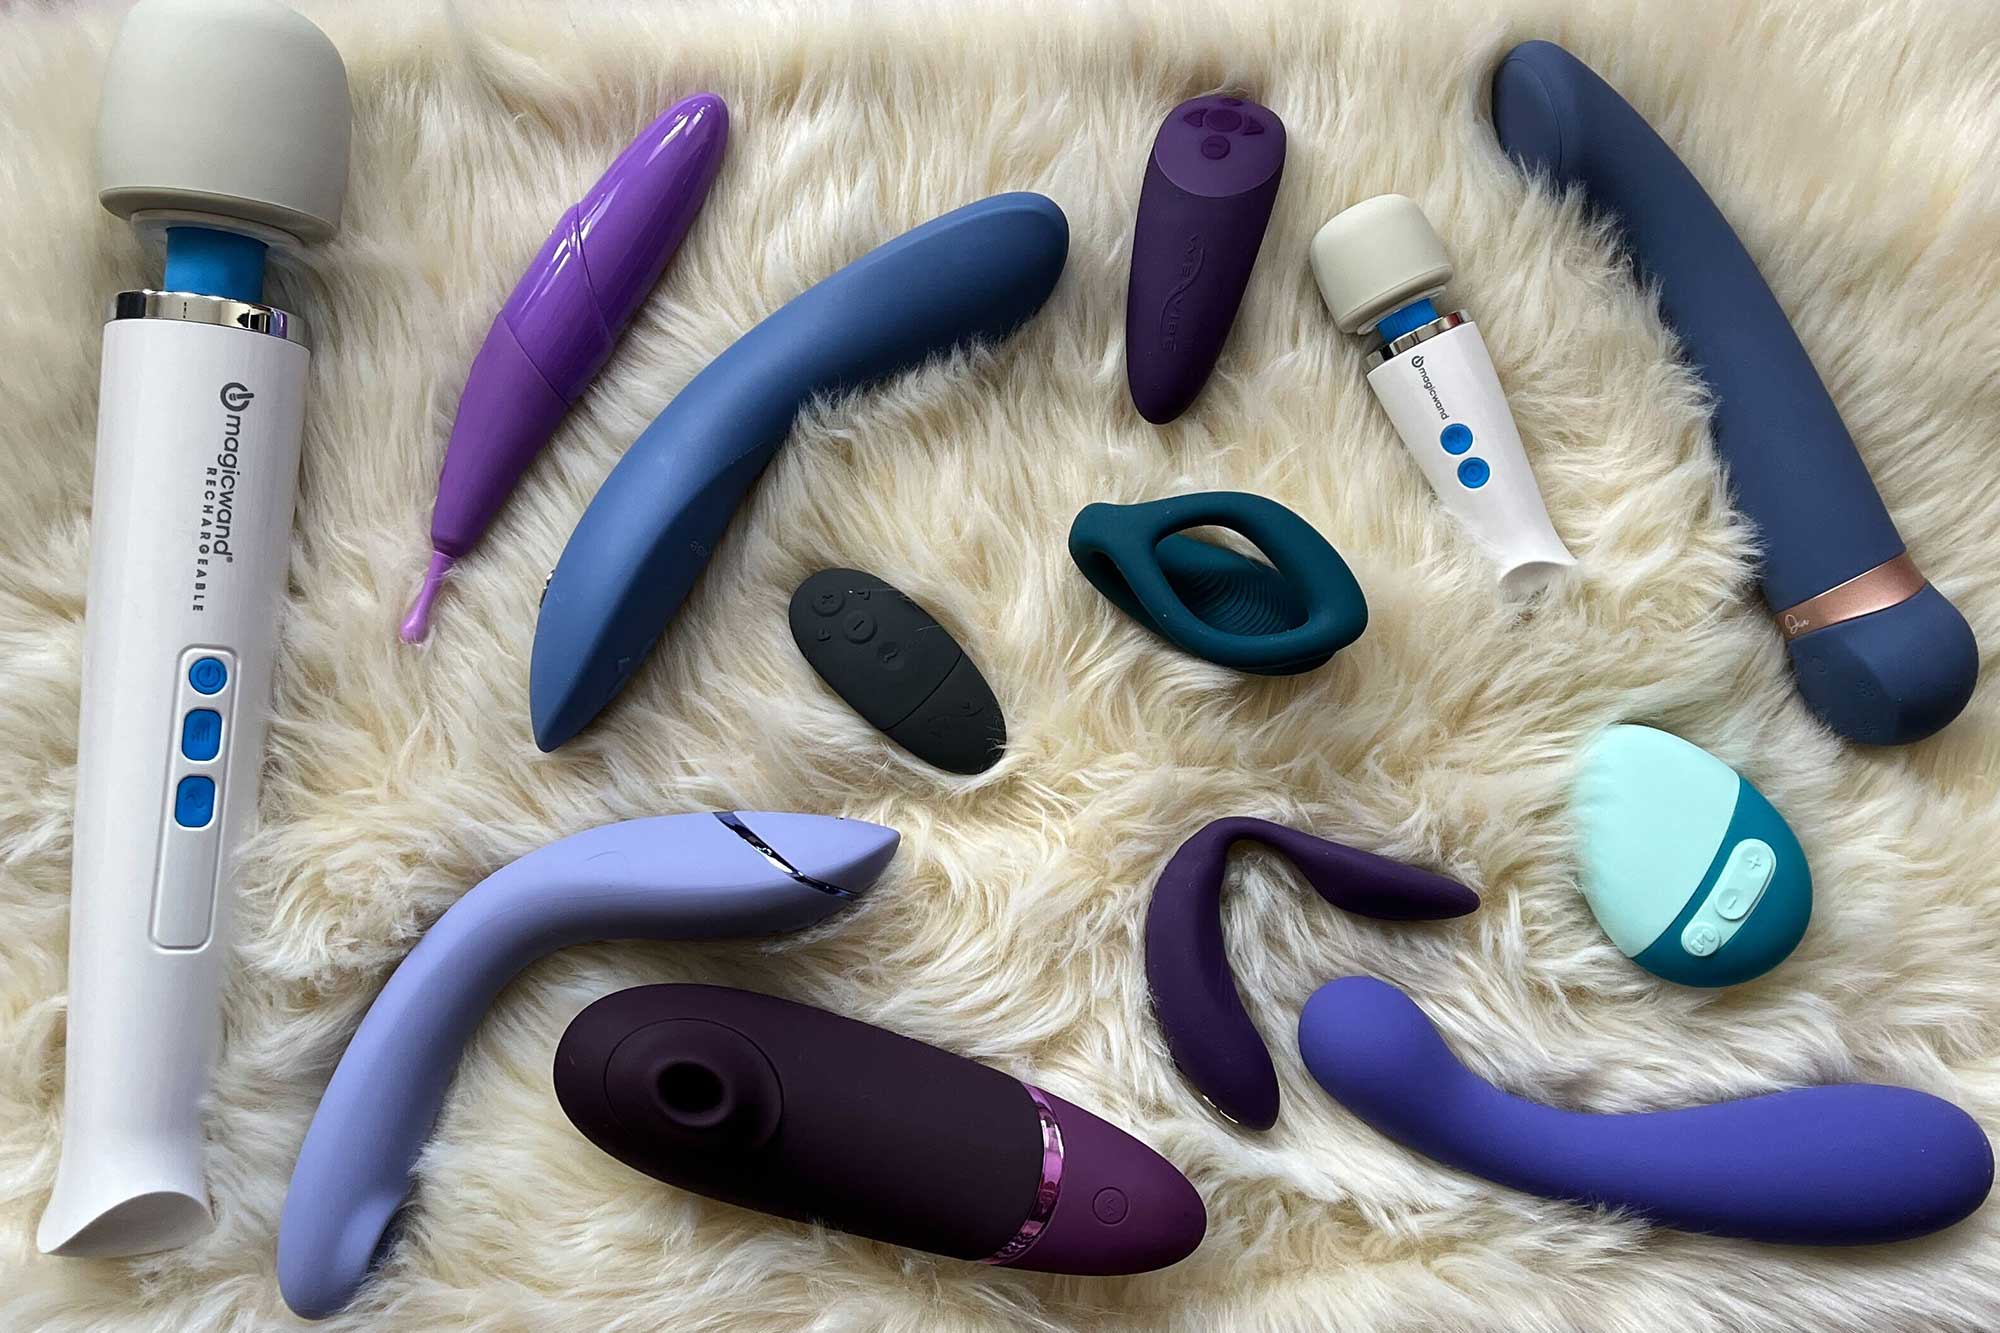 An array of the best sex toys for couples on a white fuzzy carpet.